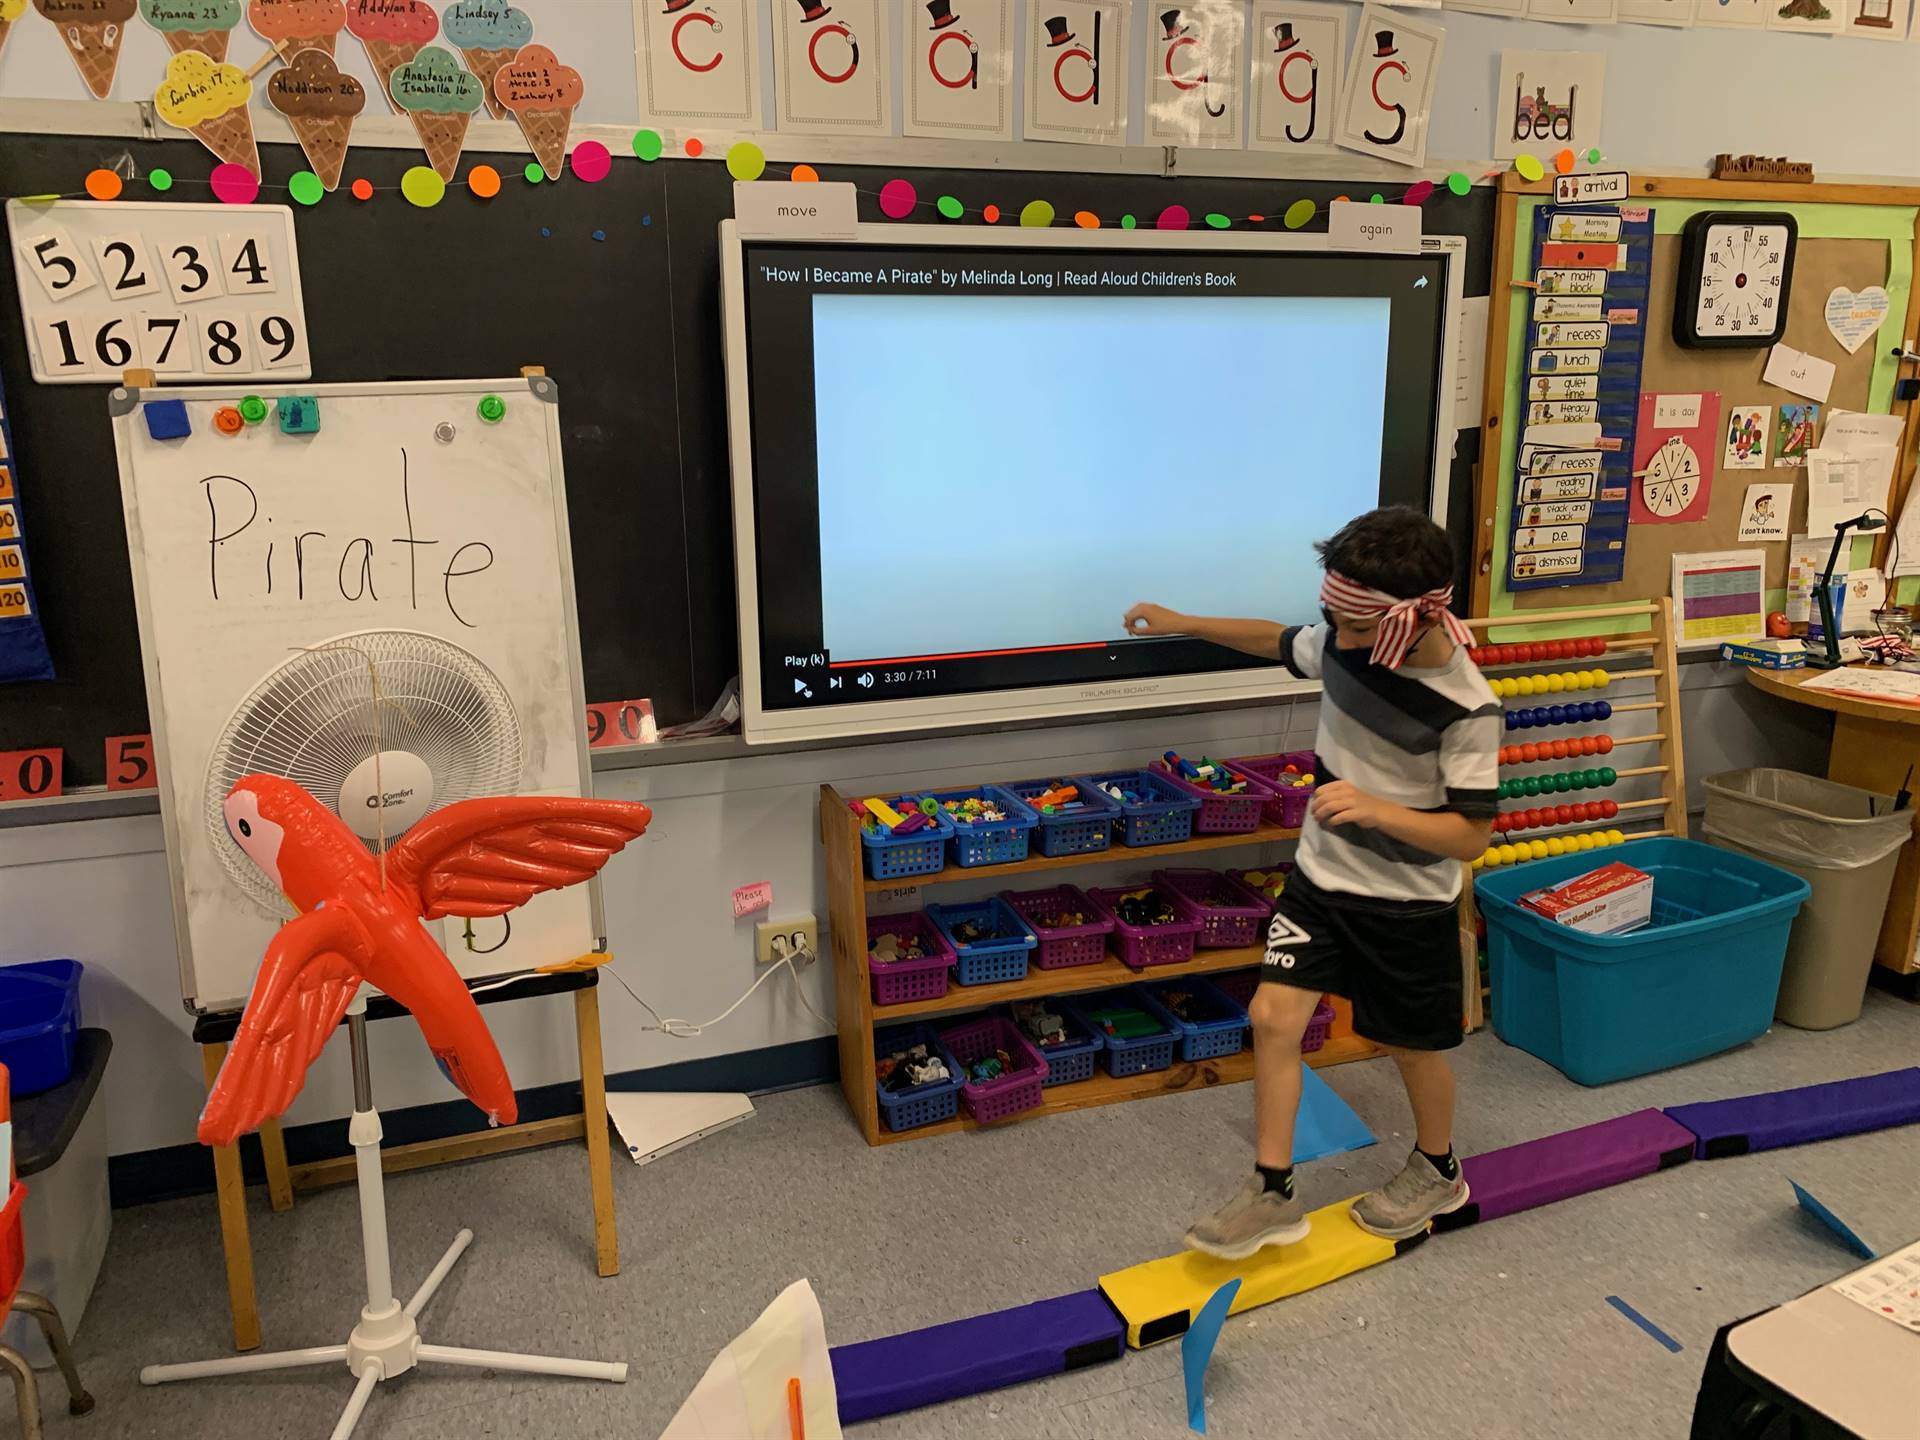 A student pirate walking the "plank".